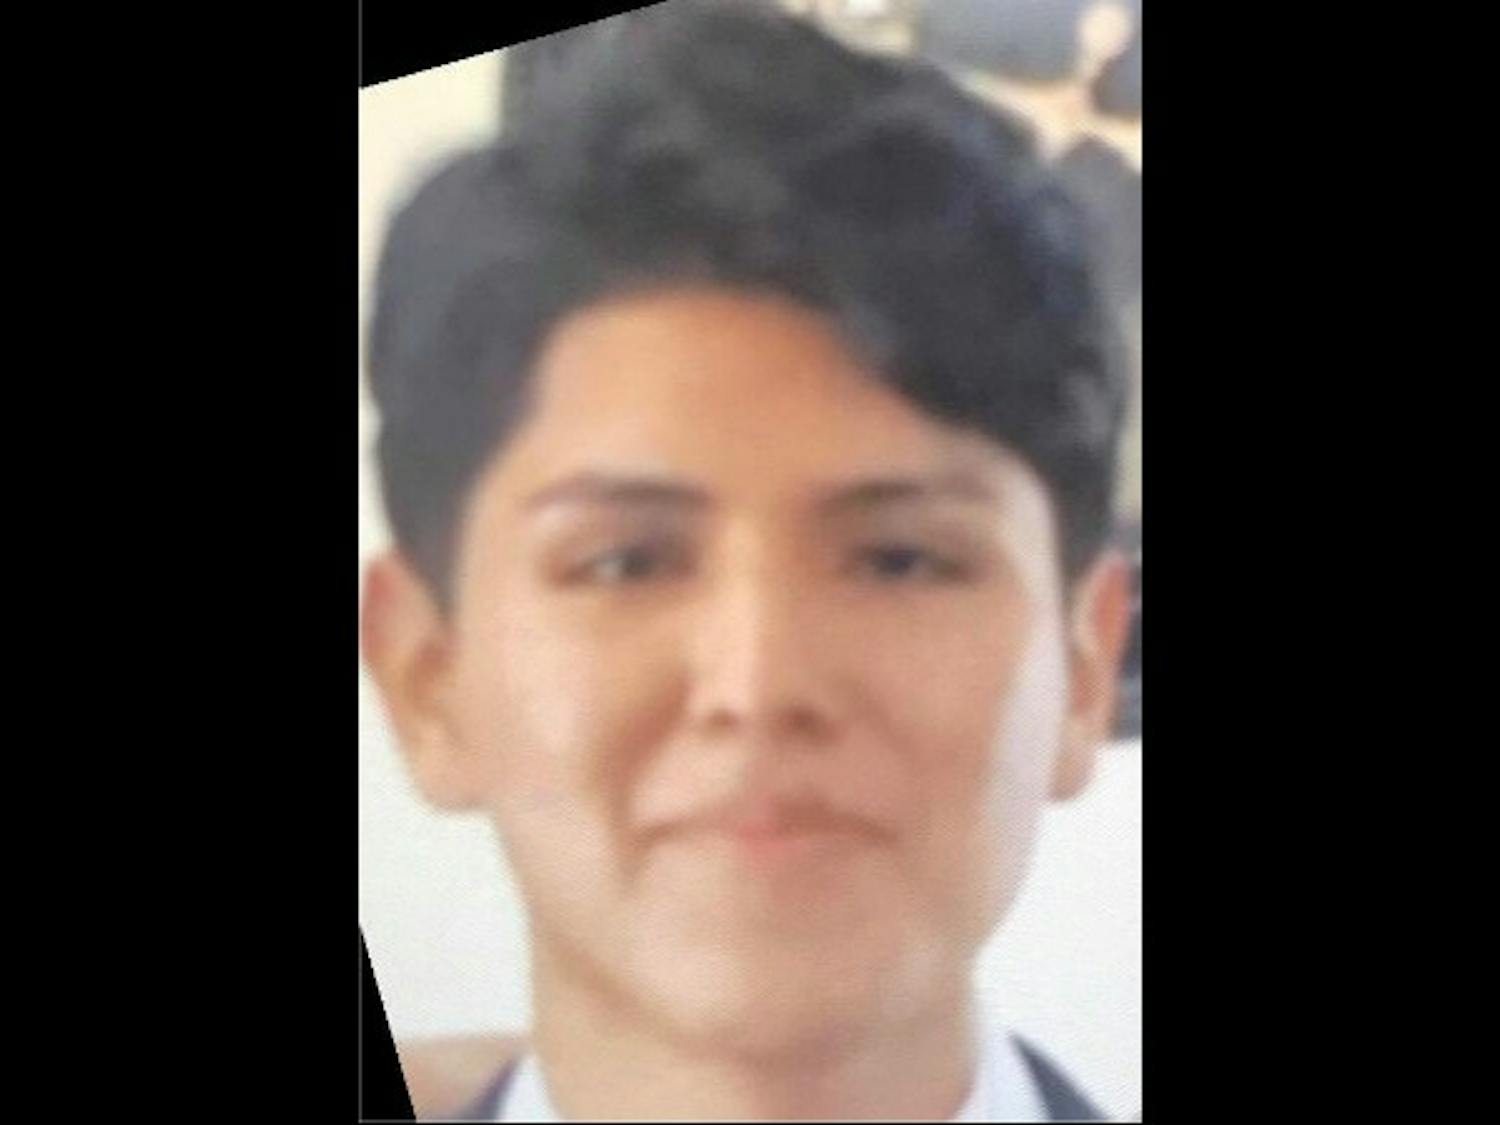 Eighteen-year-old Sebastian Serafin-Bazan died on Wednesday after Friday's alleged hazing on South Campus.